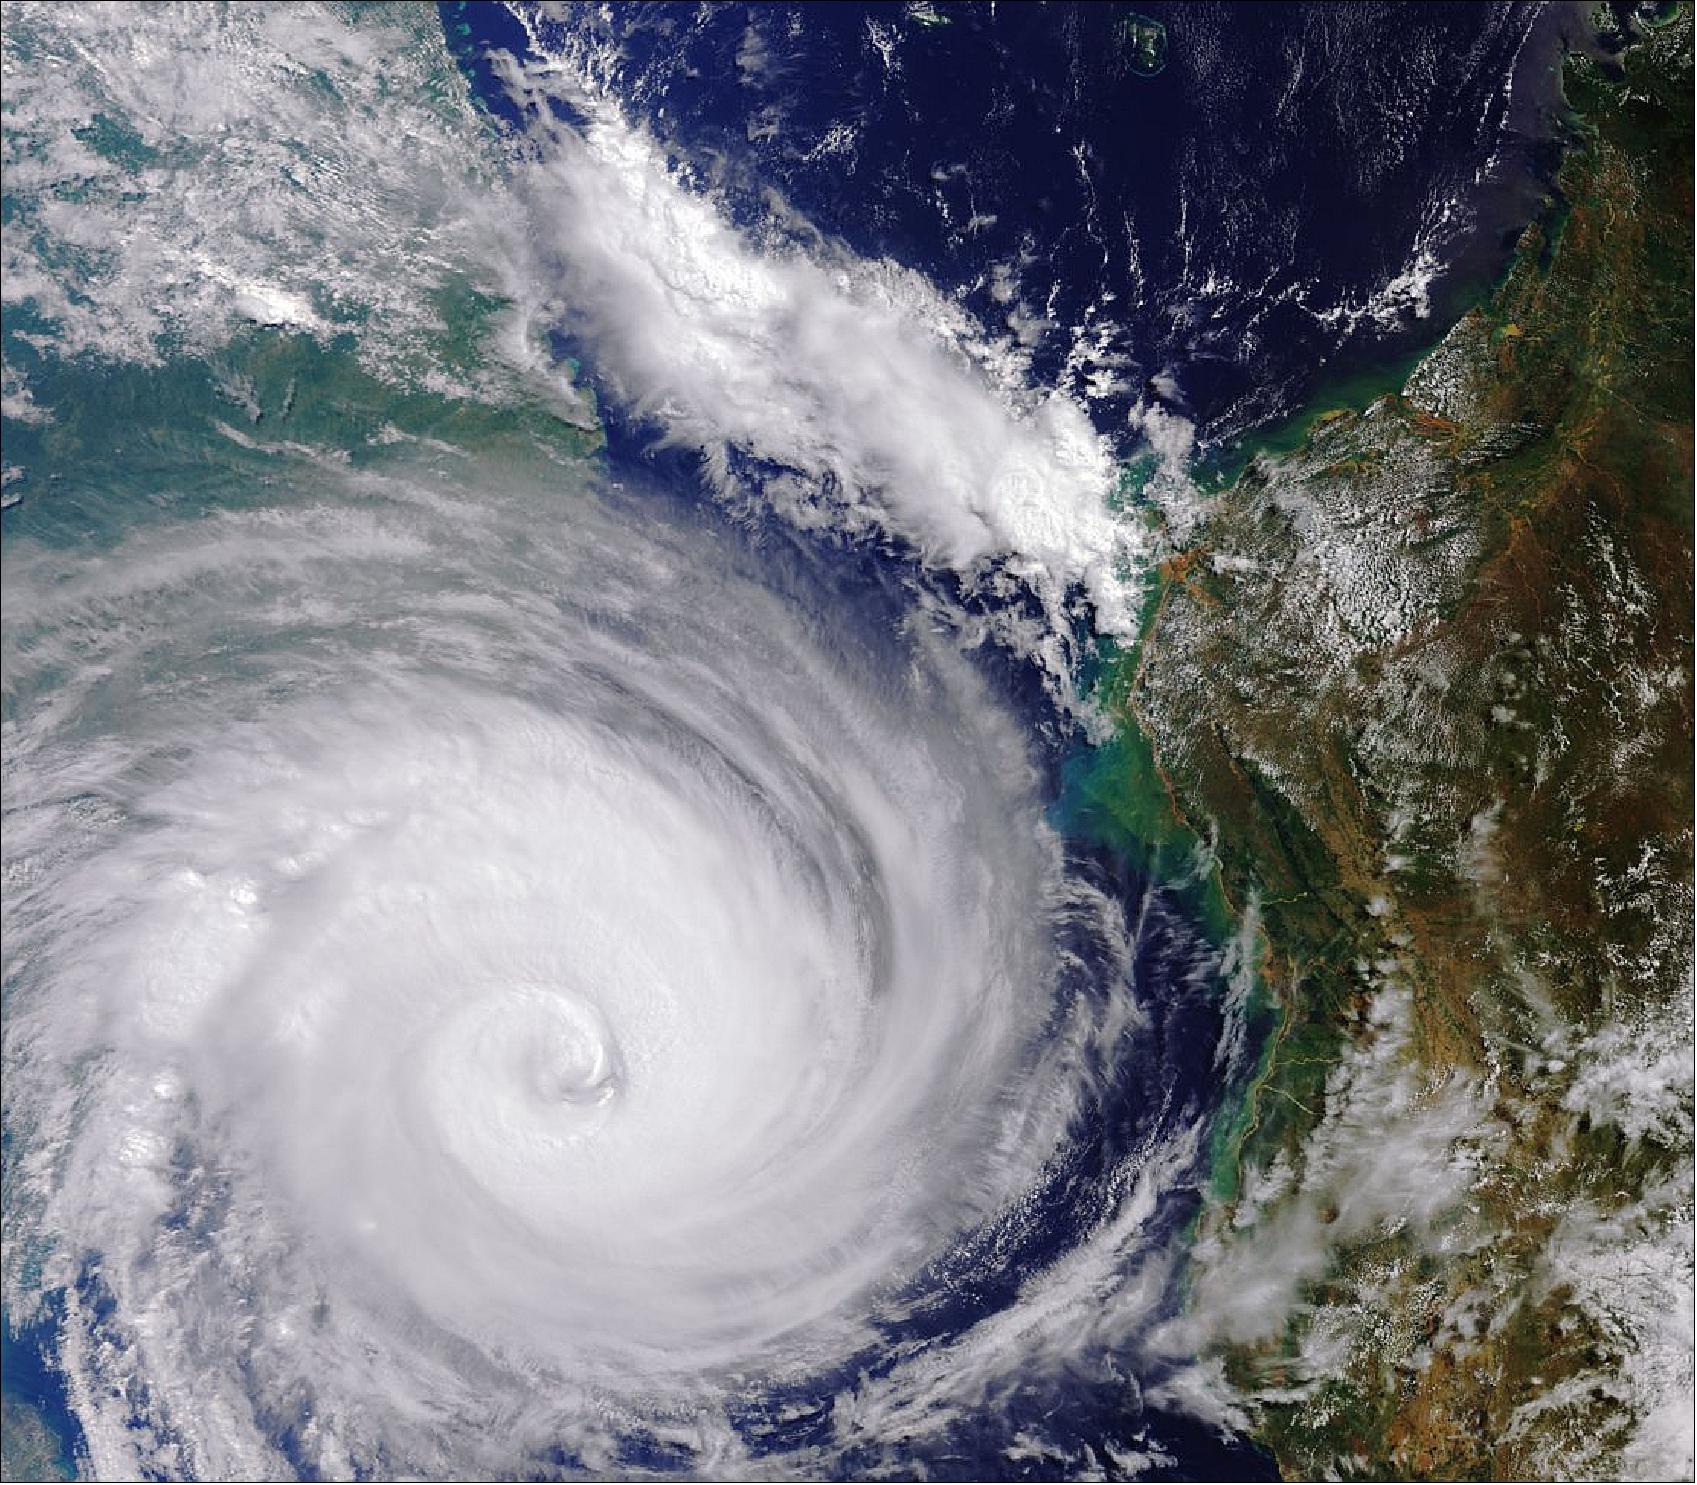 Figure 26: Captured by the Copernicus Sentinel-3 mission, this image shows Cyclone Idai on 13 March 2019 west of Madagascar and heading for Mozambique. Here, the width of the storm is around 800–1000 km, but does not include the whole extent of Idai. The storm went on to cause widespread destruction in Mozambique, Malawi and Zimbabwe. With thousands of people losing their lives, and houses, roads and croplands submerged, the International Charter Space and Major Disasters and the Copernicus Emergency Mapping Service were triggered to supply maps of flooded areas based on satellite data to help emergency response efforts (image credit: ESA, the image contains modified Copernicus Sentinel data (2019), processed by ESA)